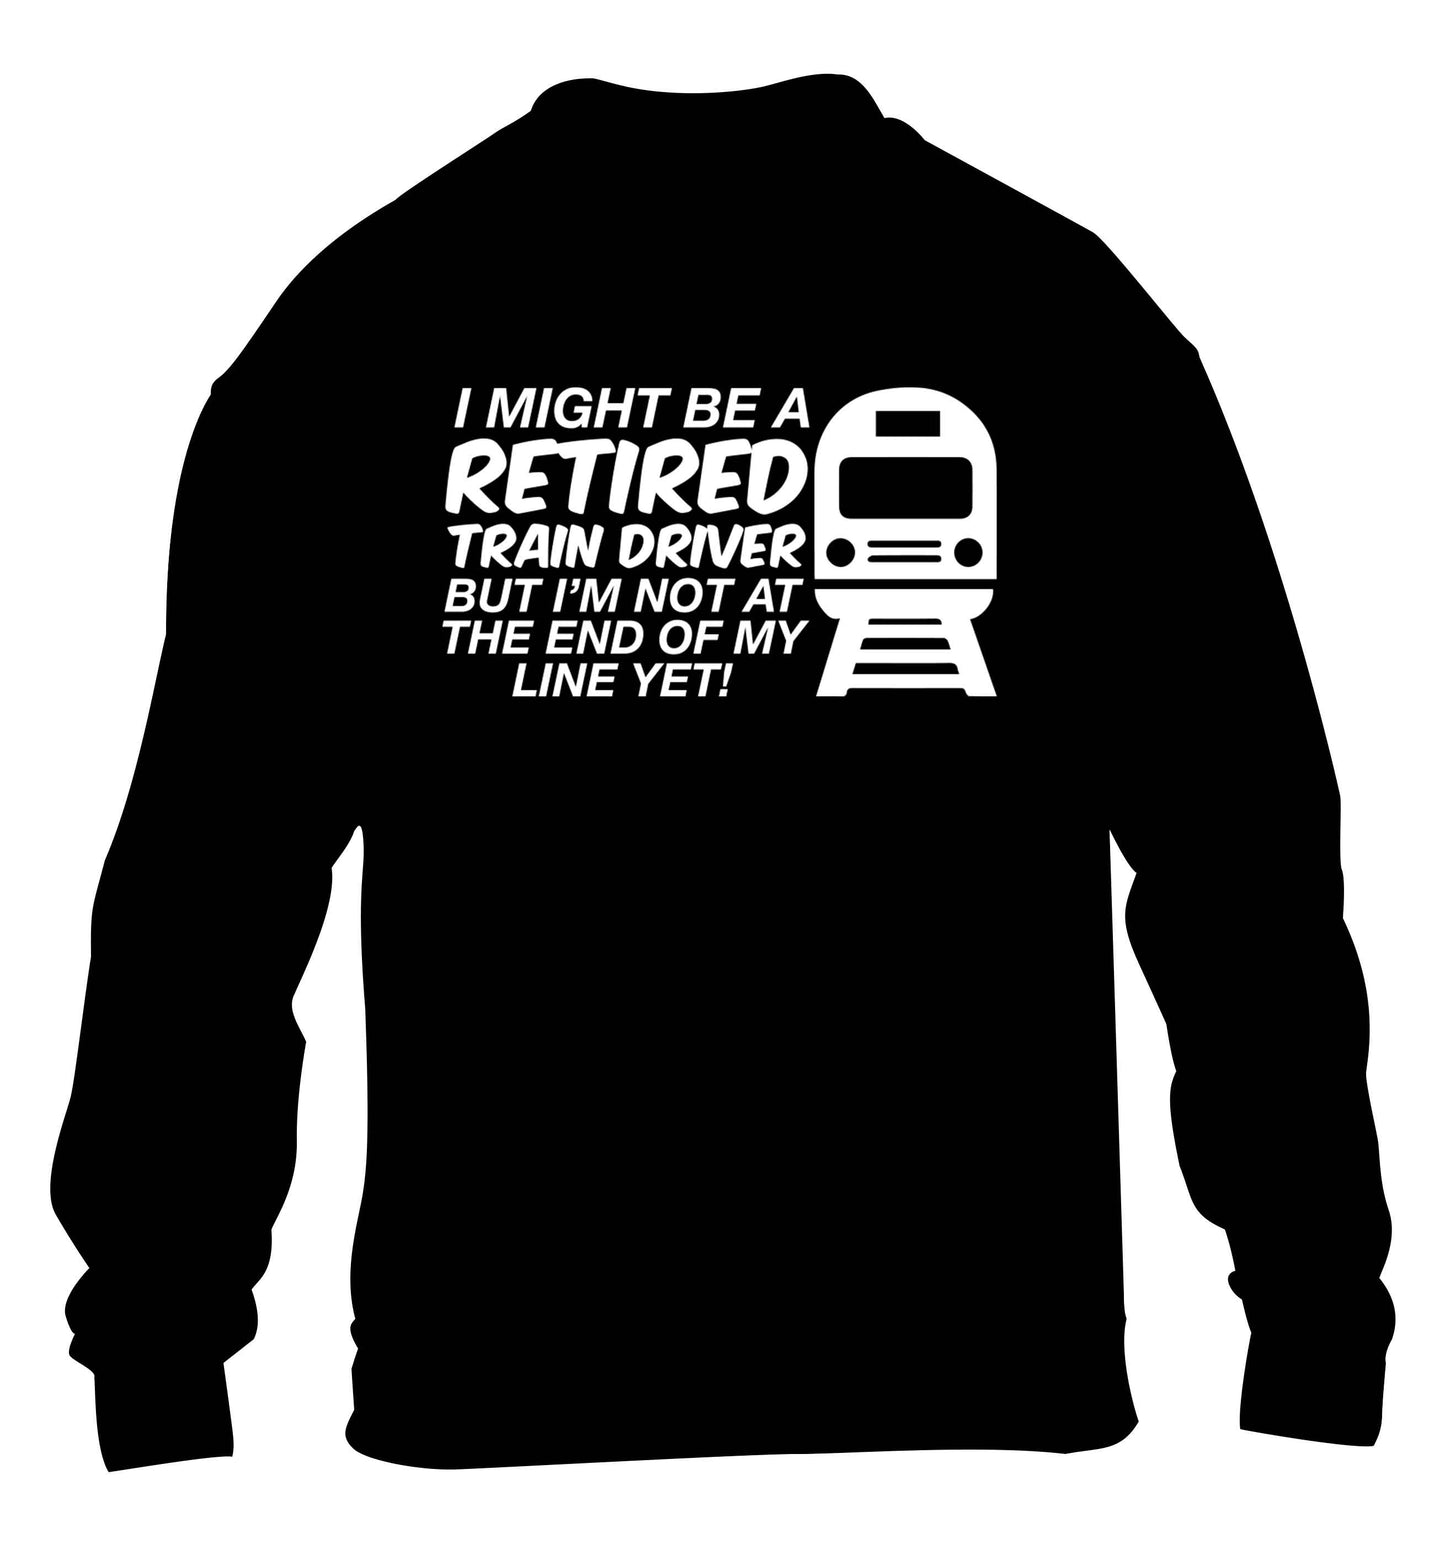 Retired train driver but I'm not at the end of my line yet children's black sweater 12-13 Years